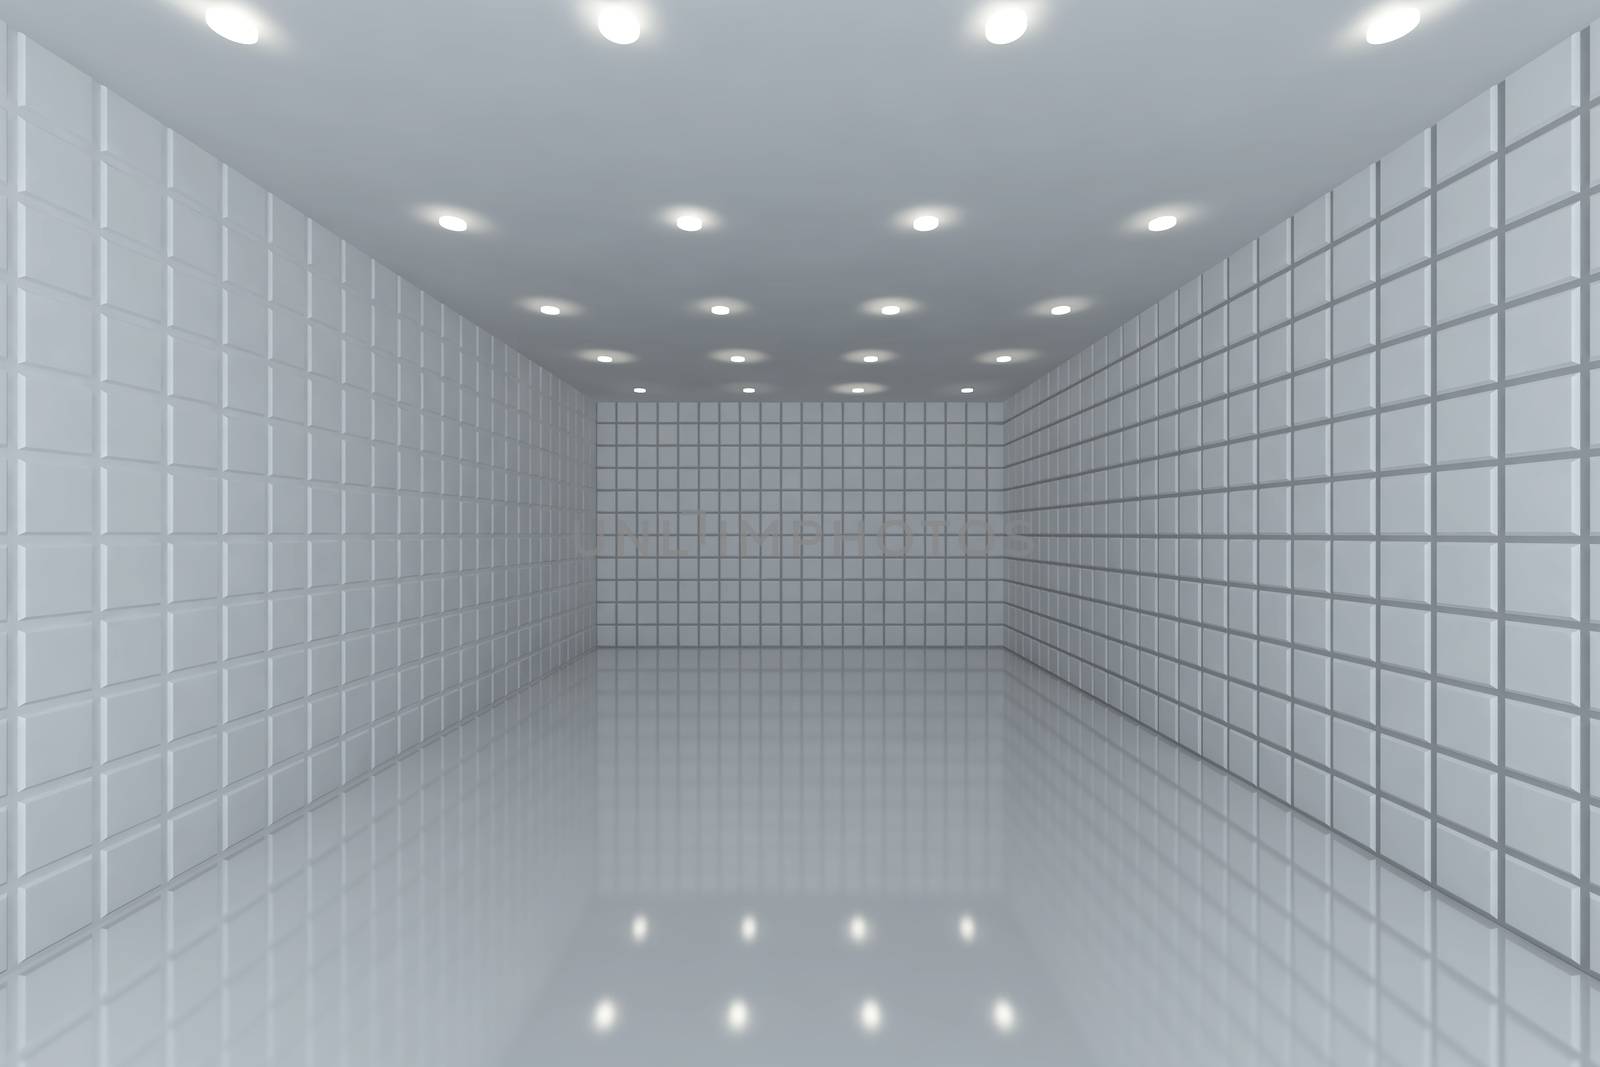 Empty room with color white tile wall